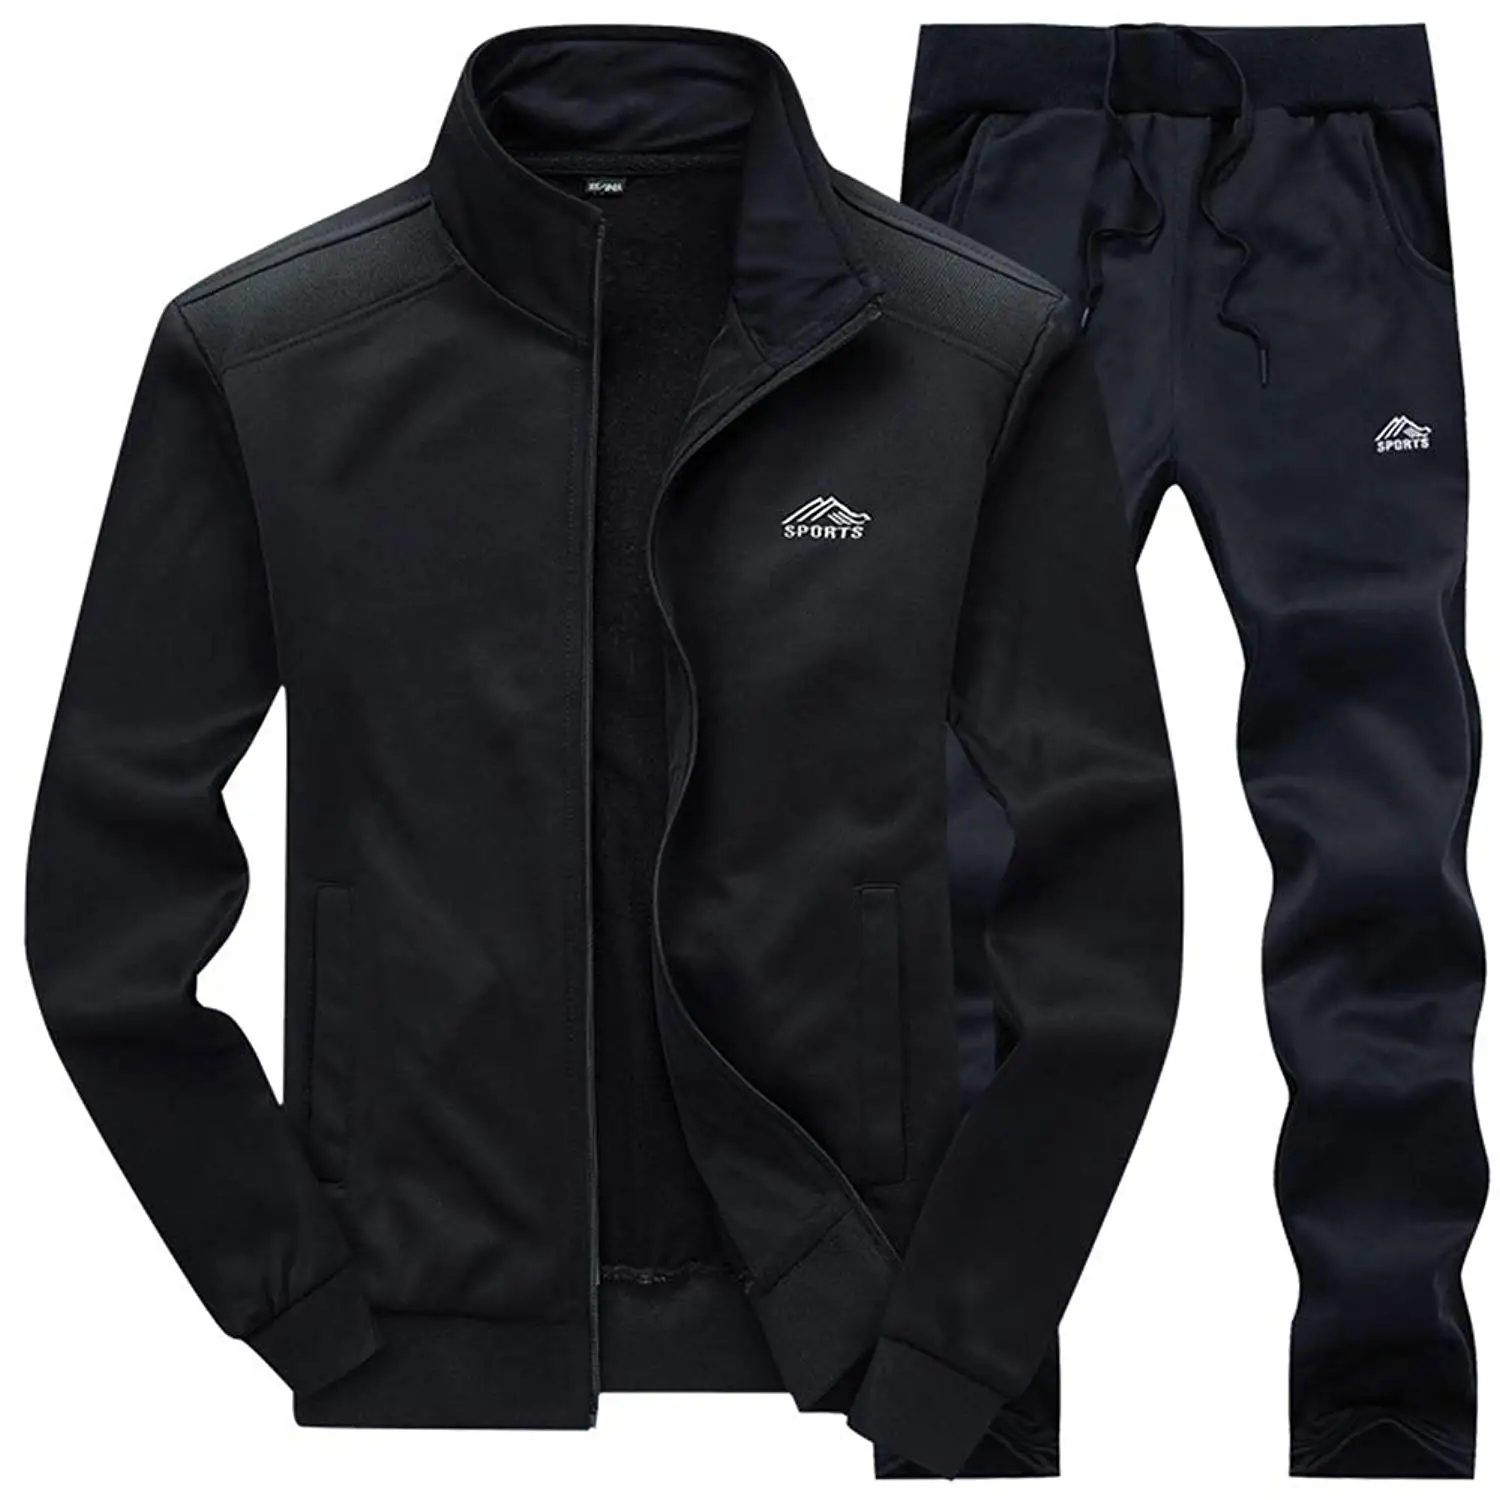 adidas tracksuit sports direct mens